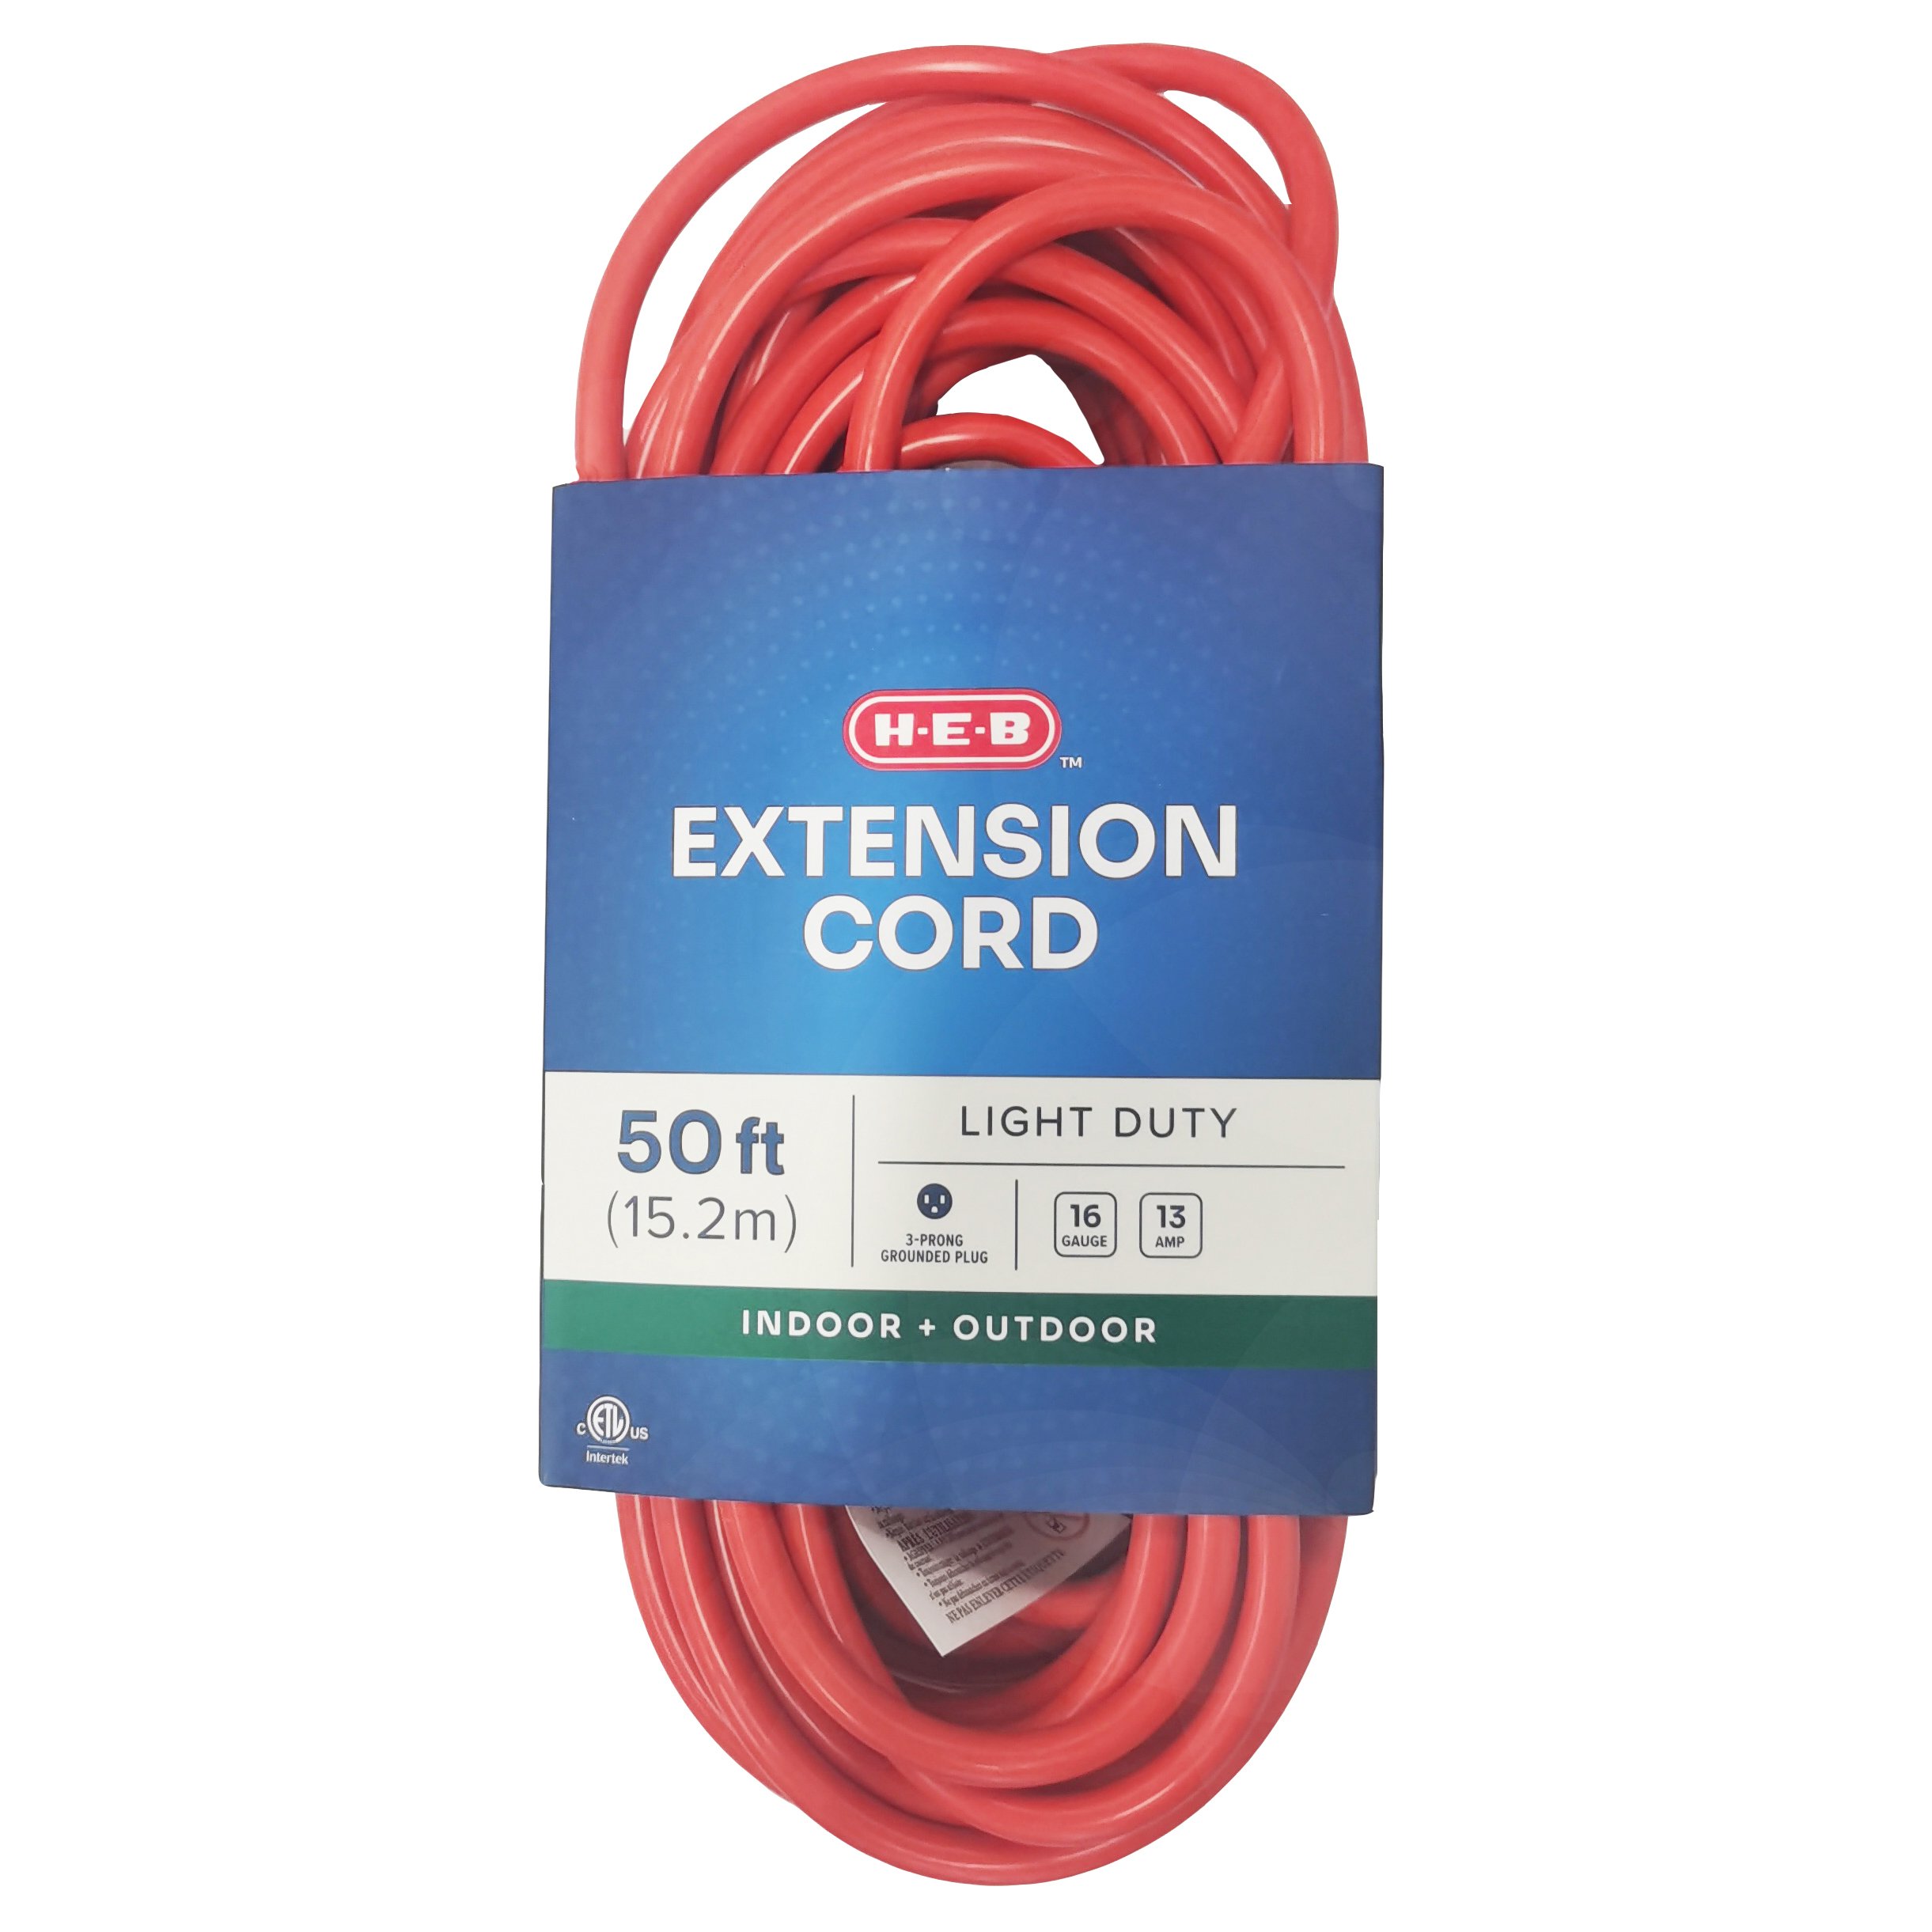 H-E-B Indoor/Outdoor Extension Cord - Shop Extension Cords at H-E-B